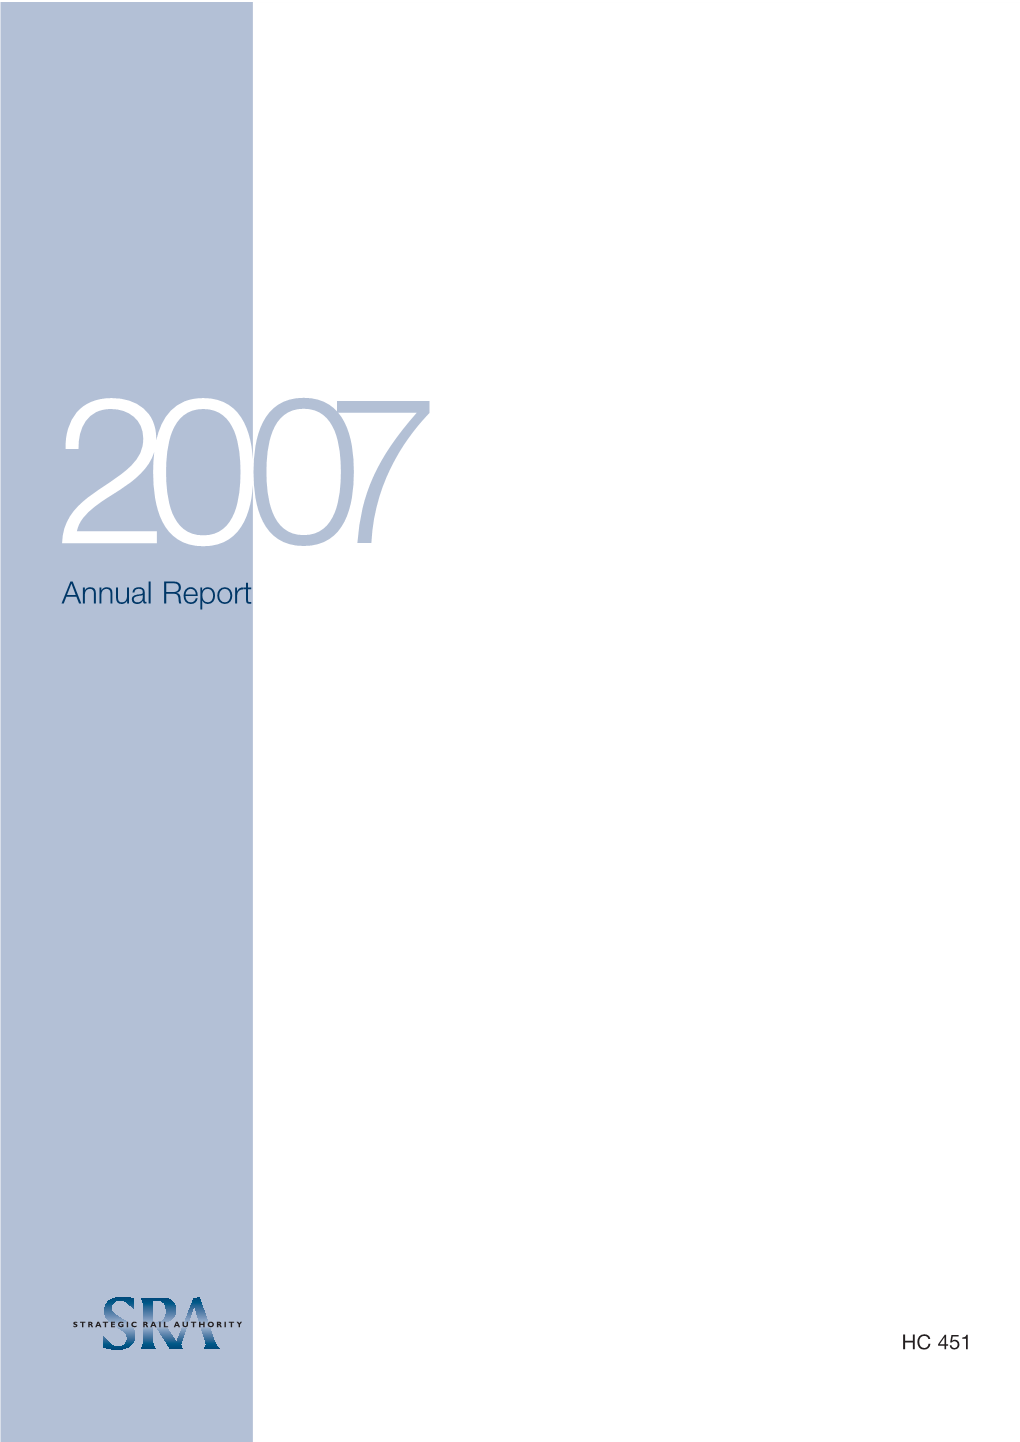 Strategic Rail Authority Annual Report and Accounts Period Ended 30 November 2006